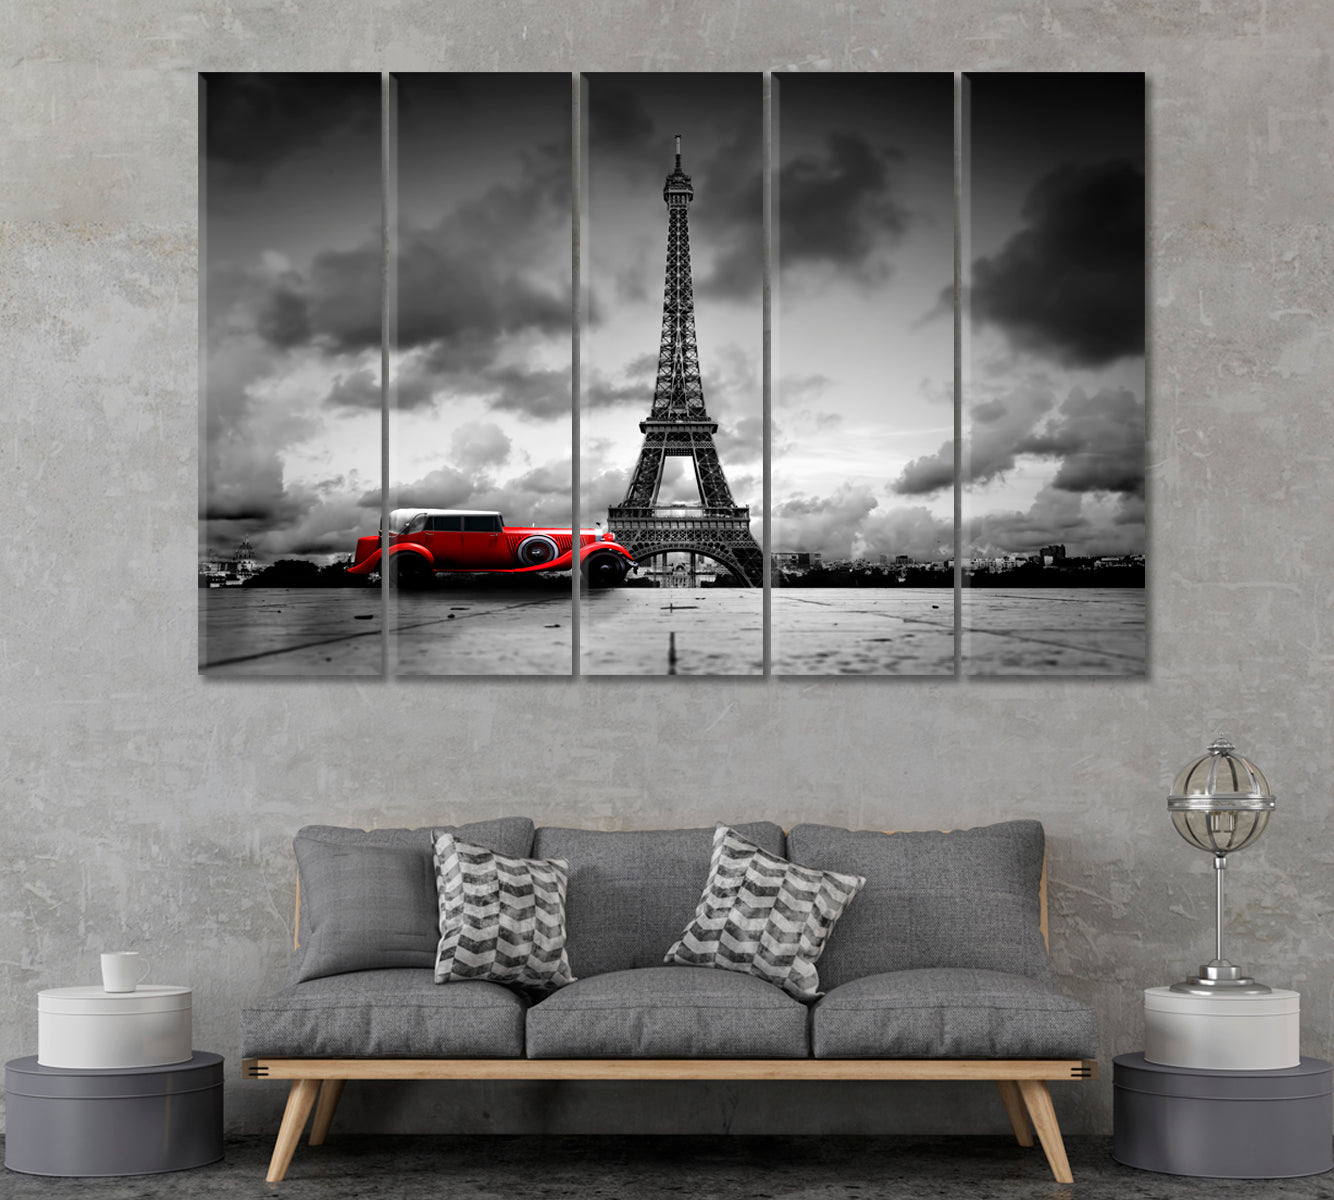 Eiffel Tower and Red Retro Car Canvas Print ArtLexy 5 Panels 36"x24" inches 